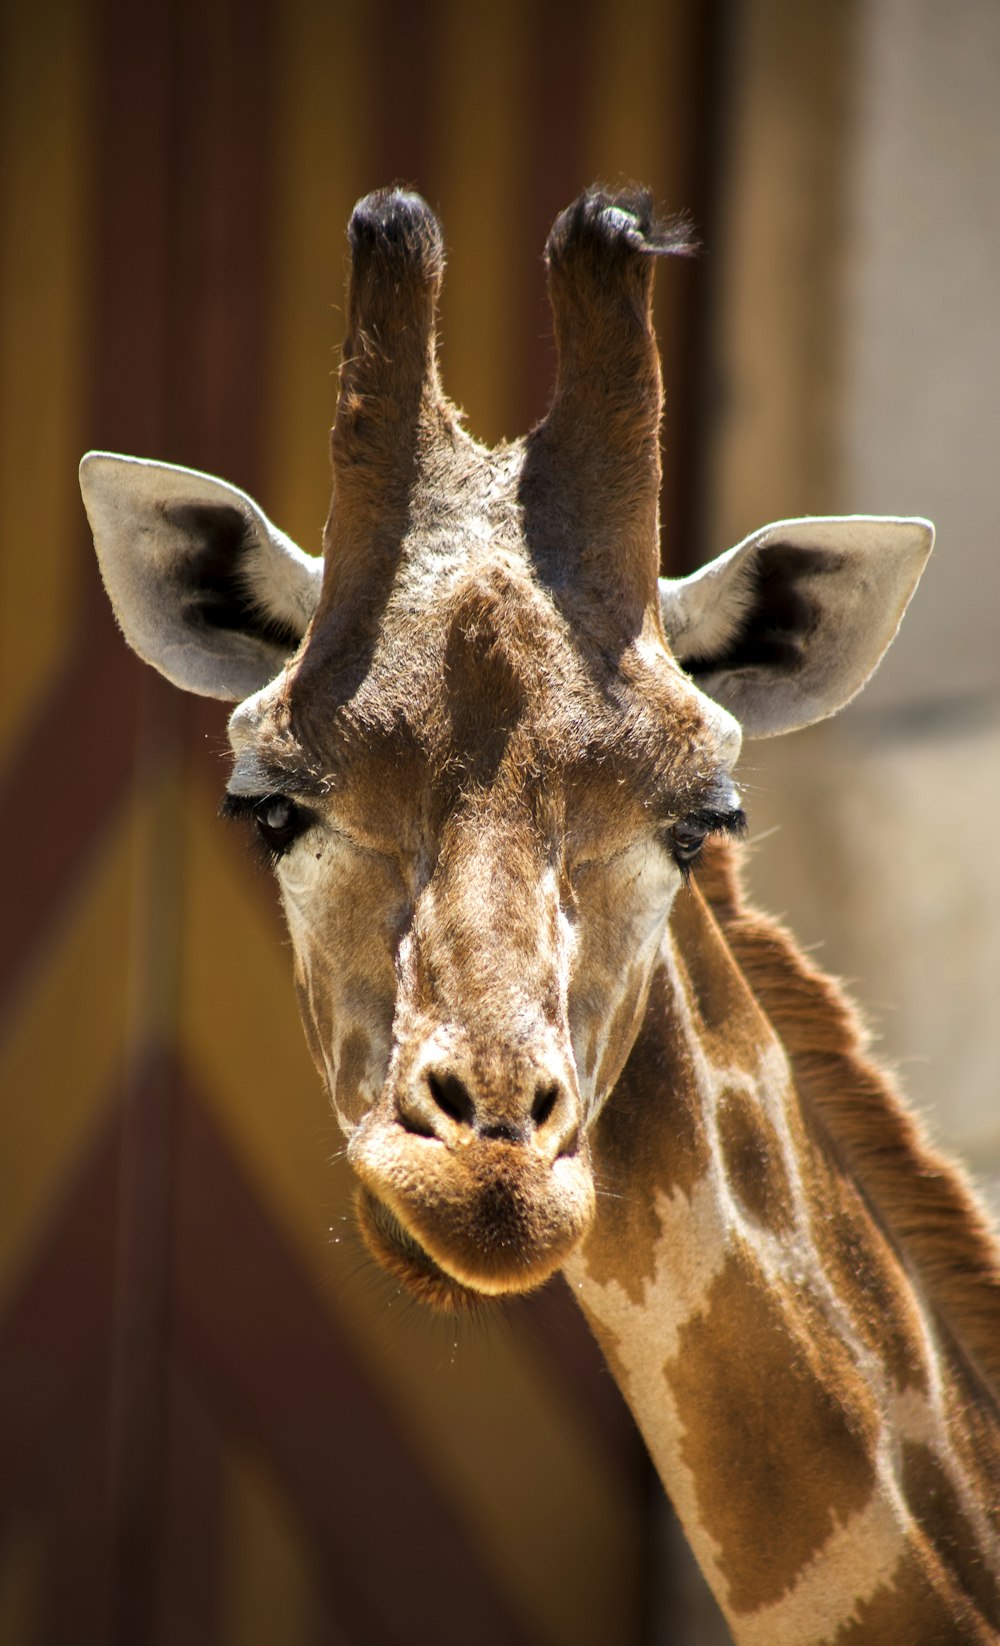 close-up photography of Giraffe during daytime